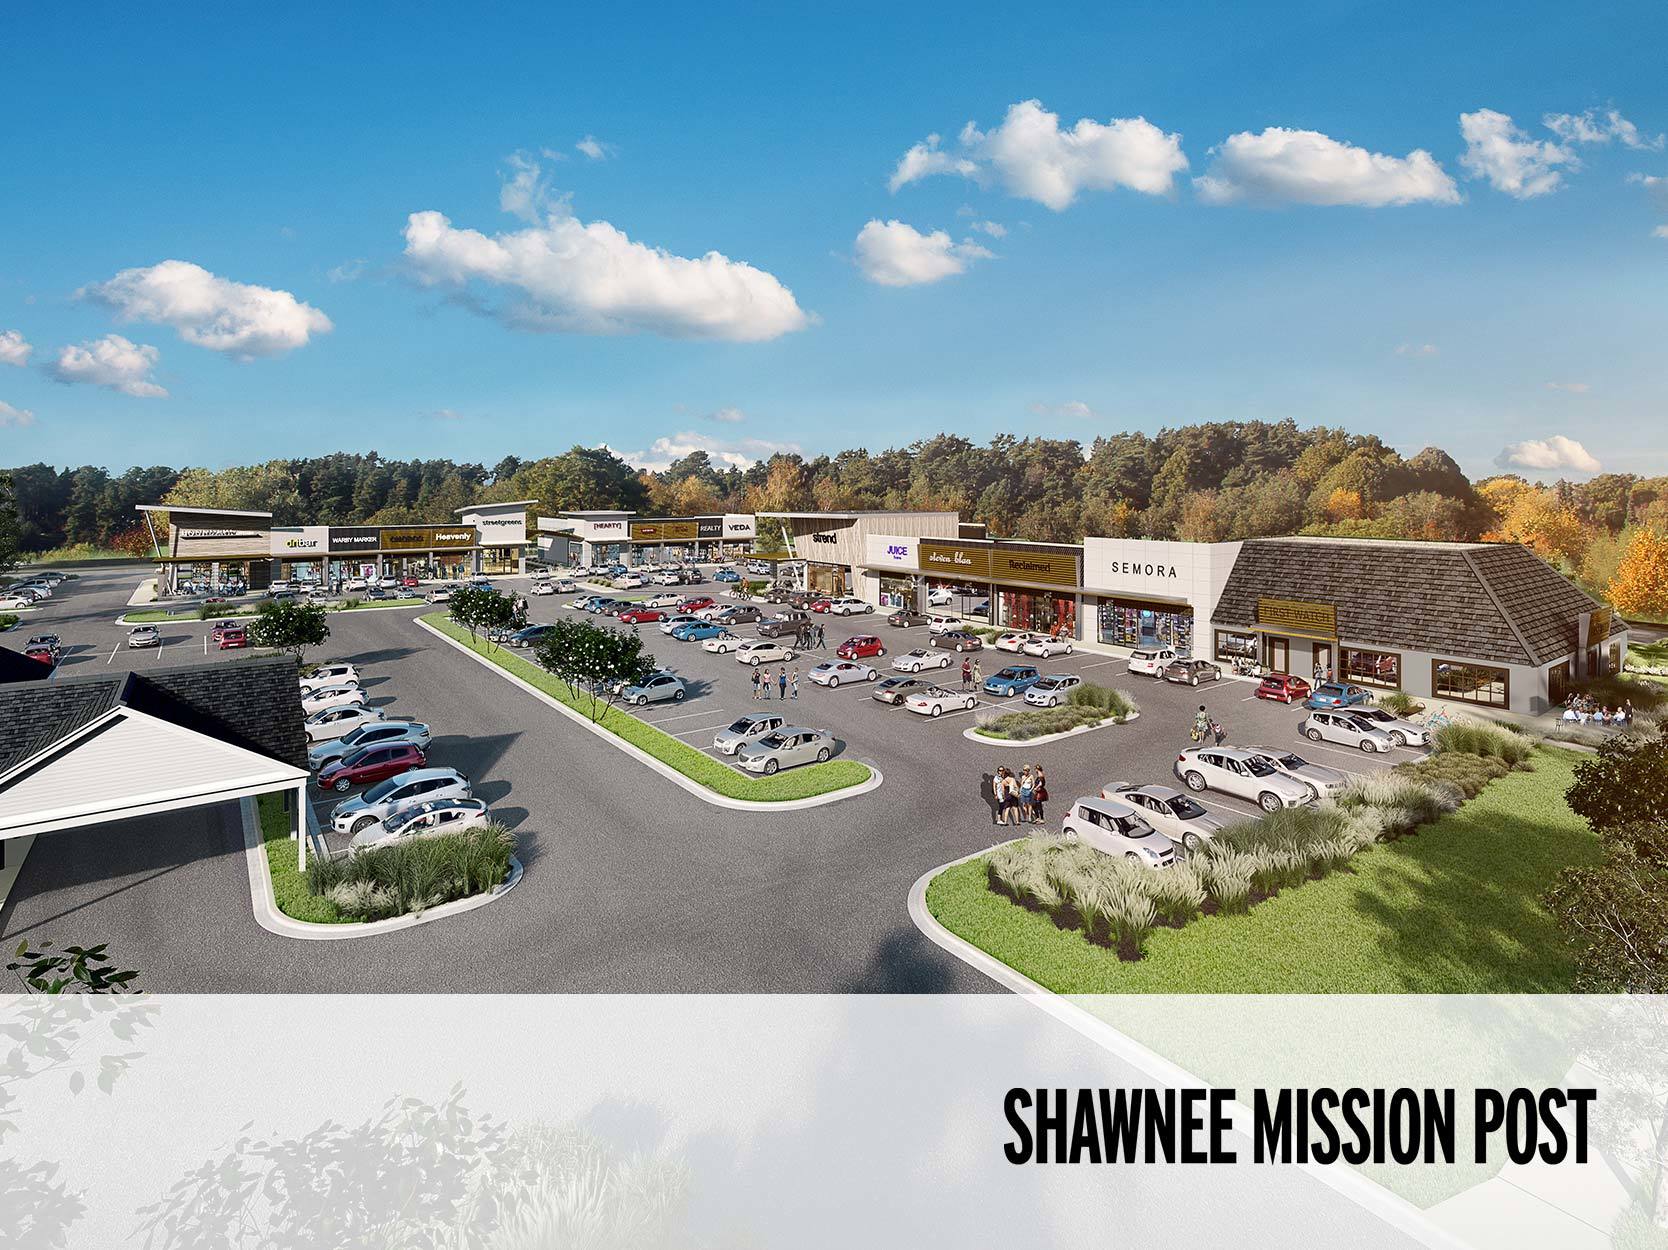 First Washington opens up leasing on new Corinth Quarter space set to break ground in 2020